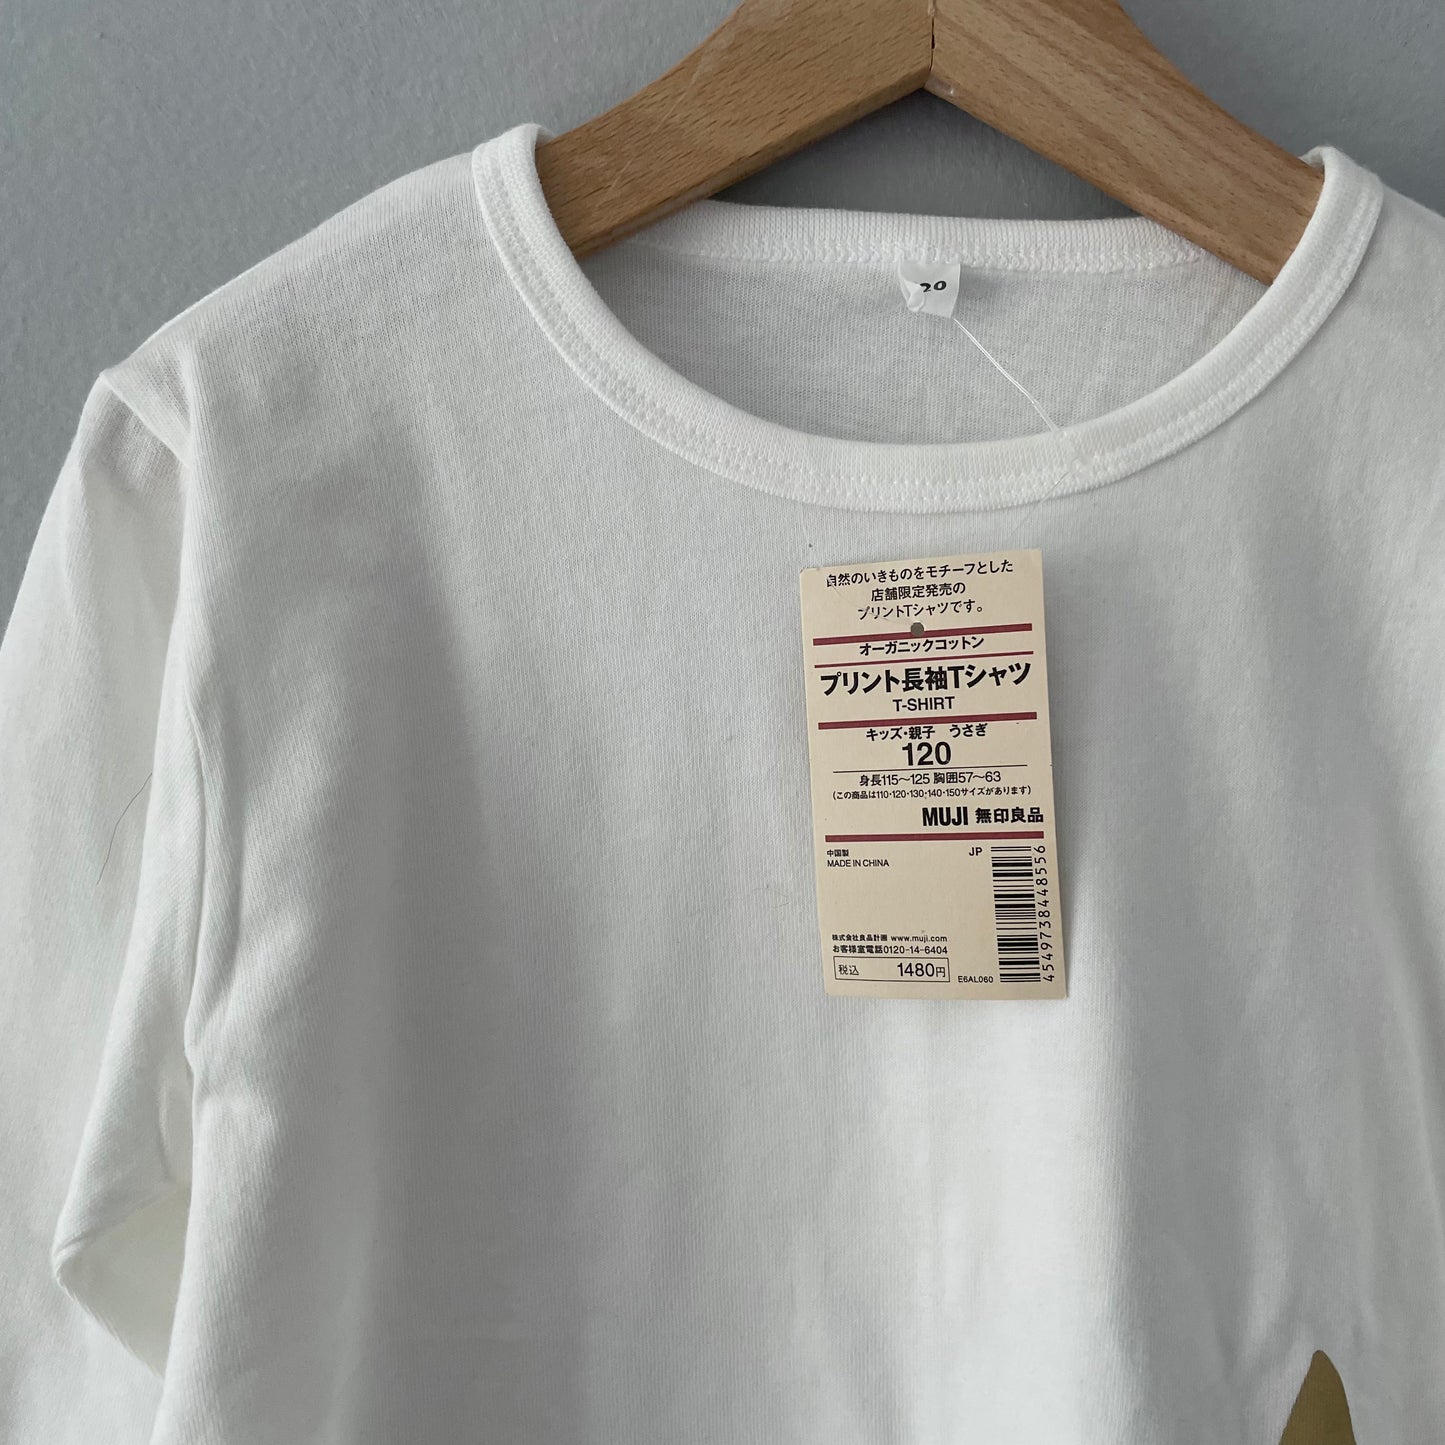 Muji / Long sleeve t-shirt / 6Y - New with tag